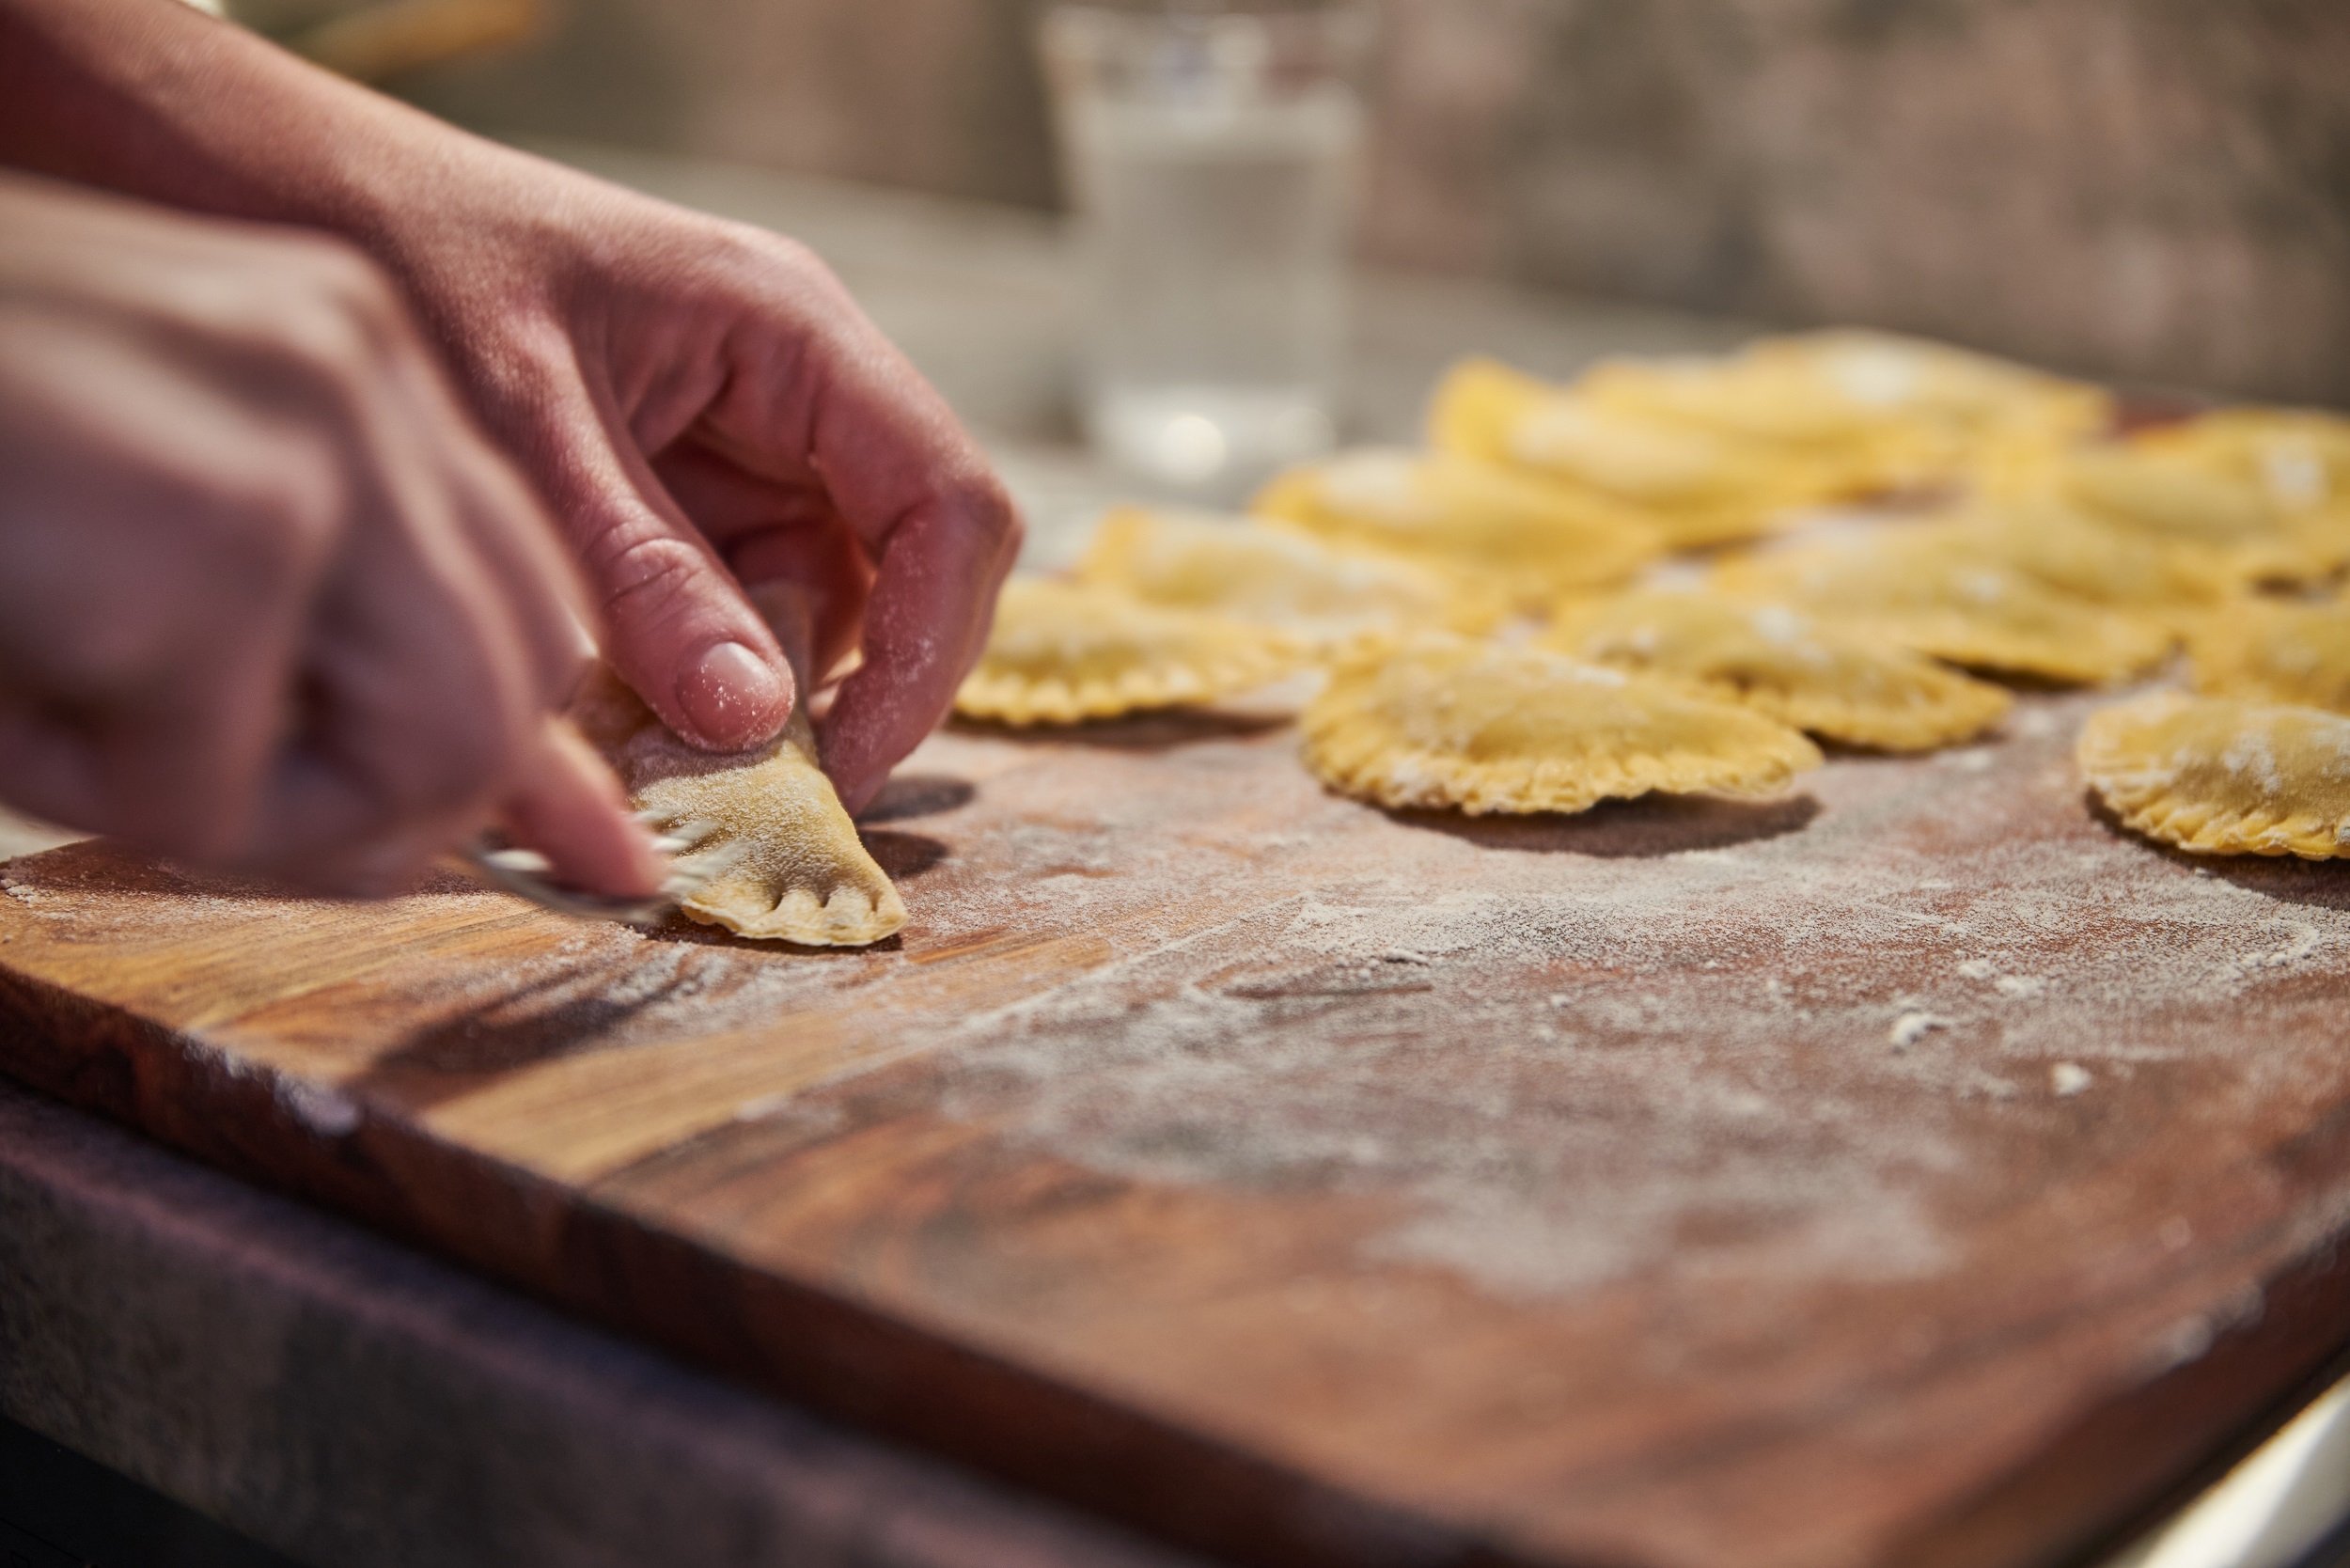 Learn How To Make Italian Pasta On Our Private Cooking Class With A Local In Positano